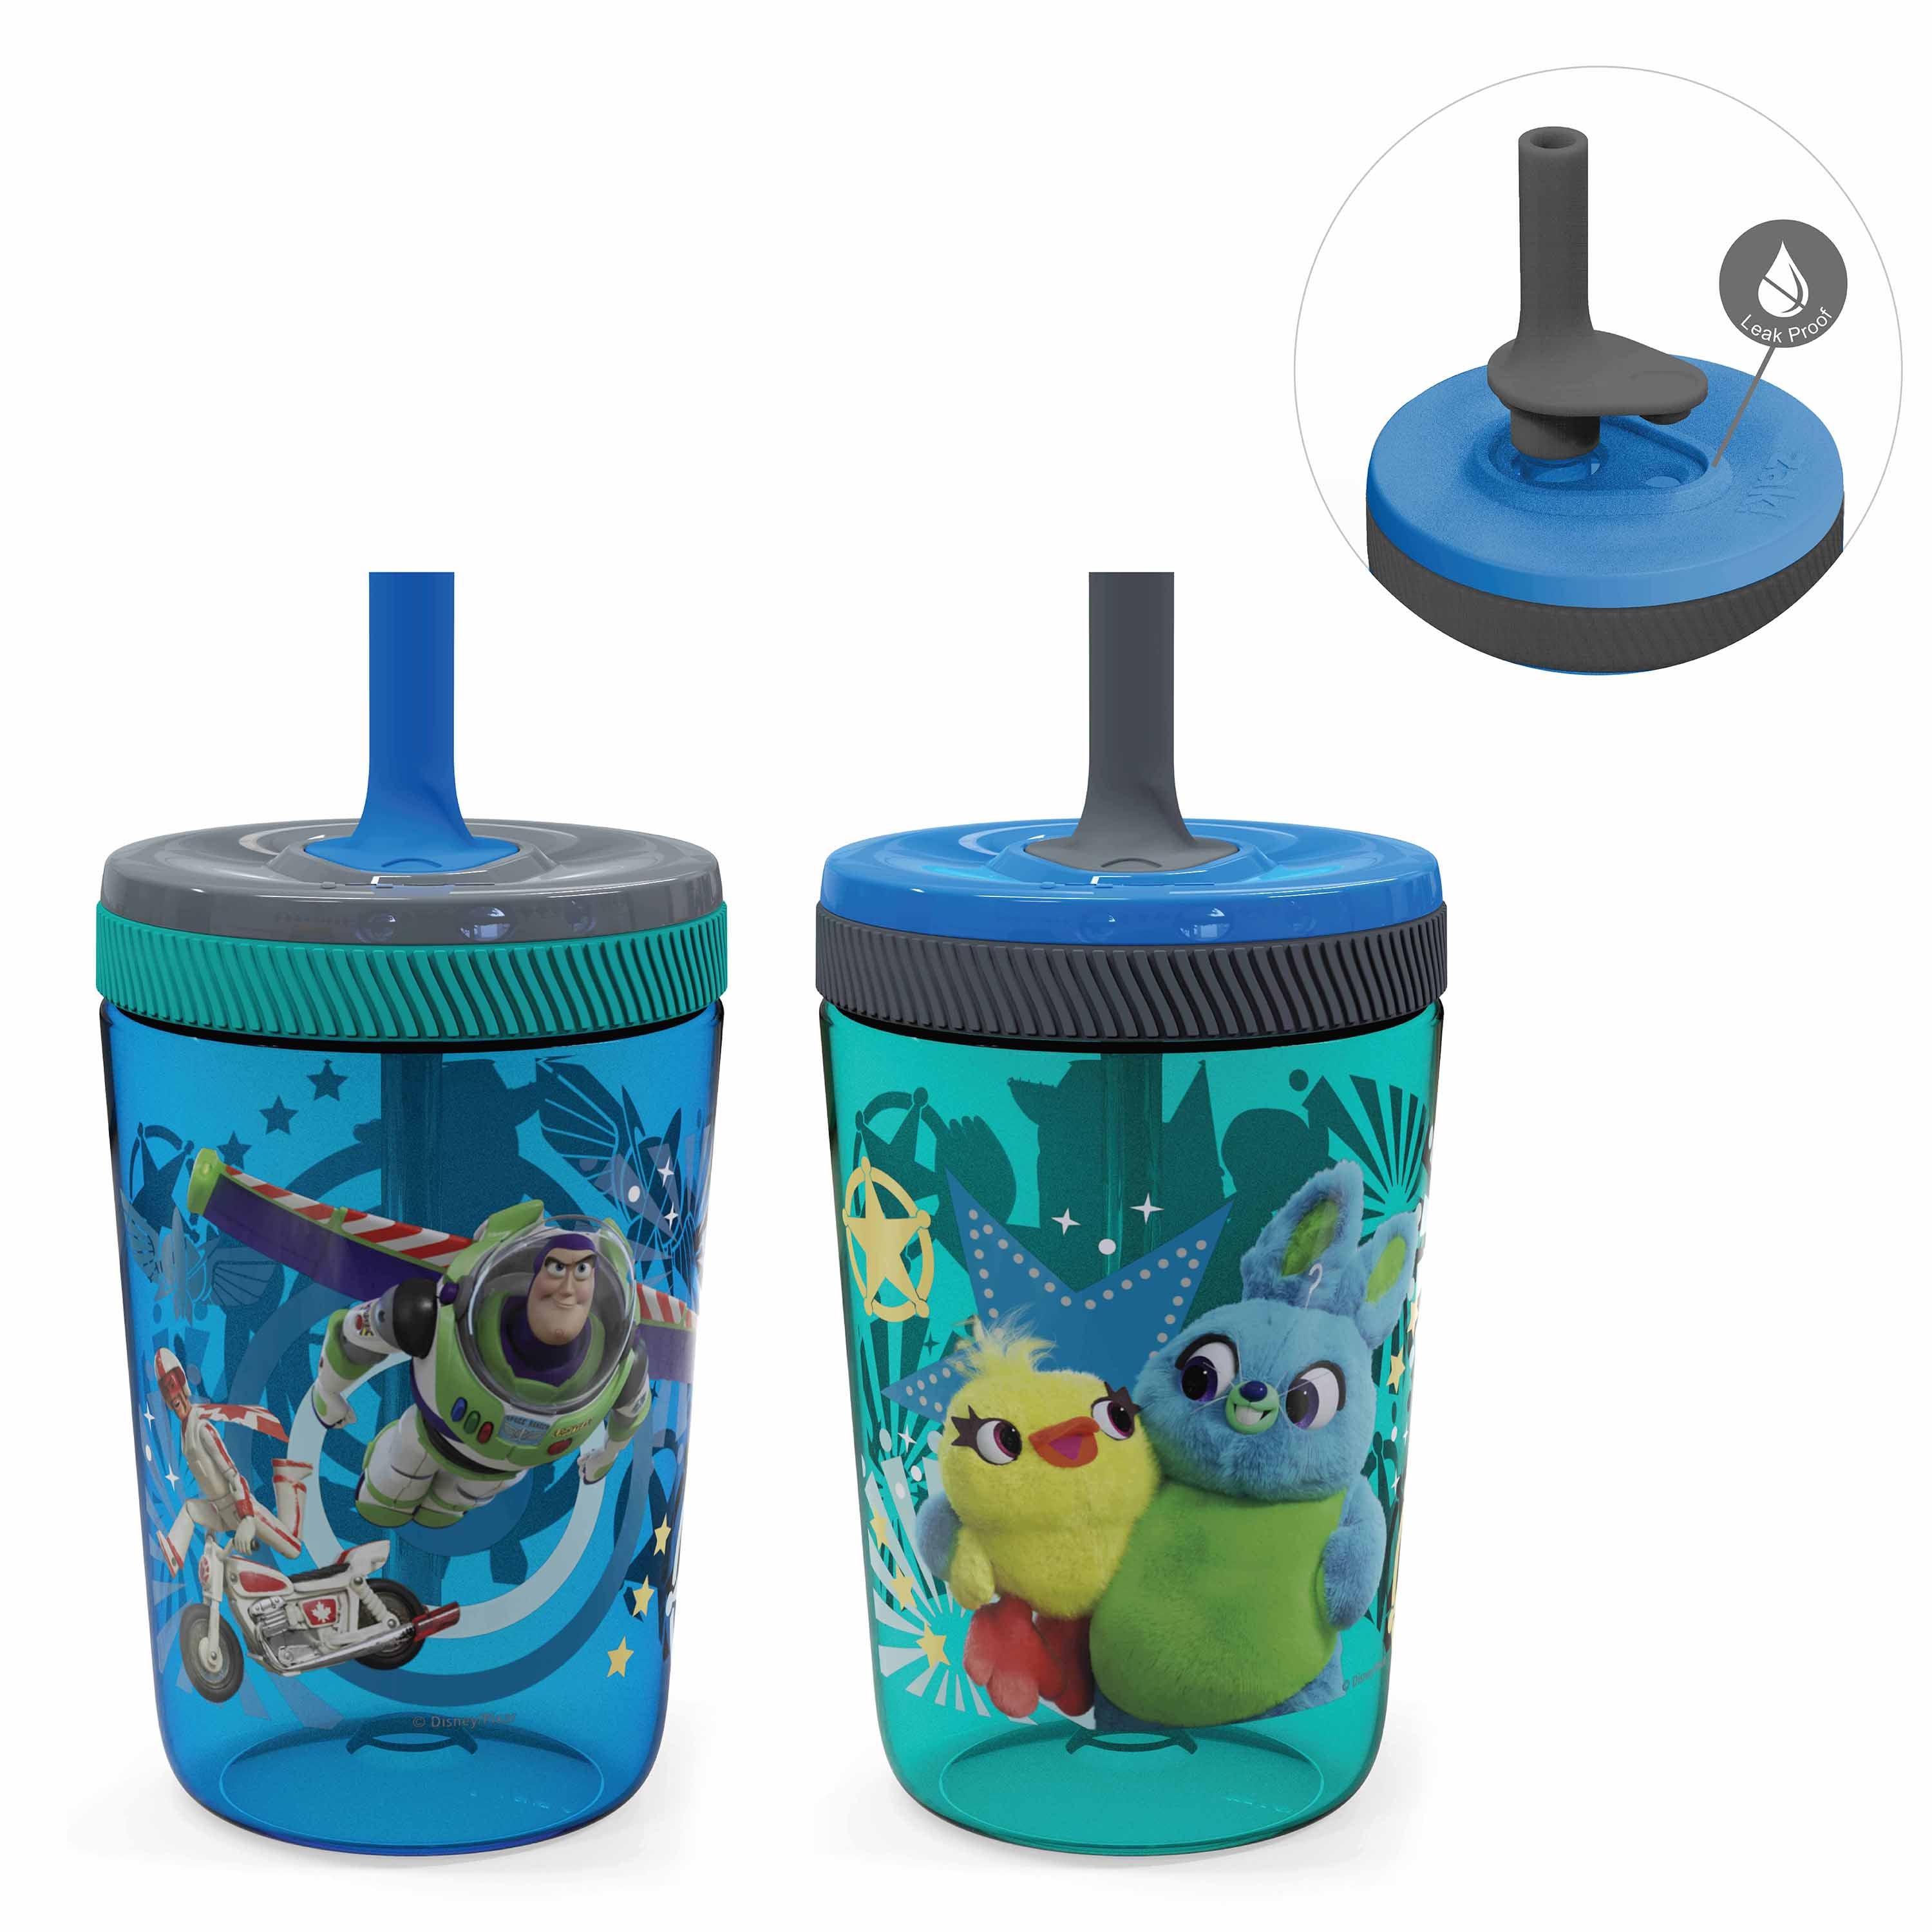 Zak Designs Space Jam: A New Legacy Slam Dunk Tumbler with Straw